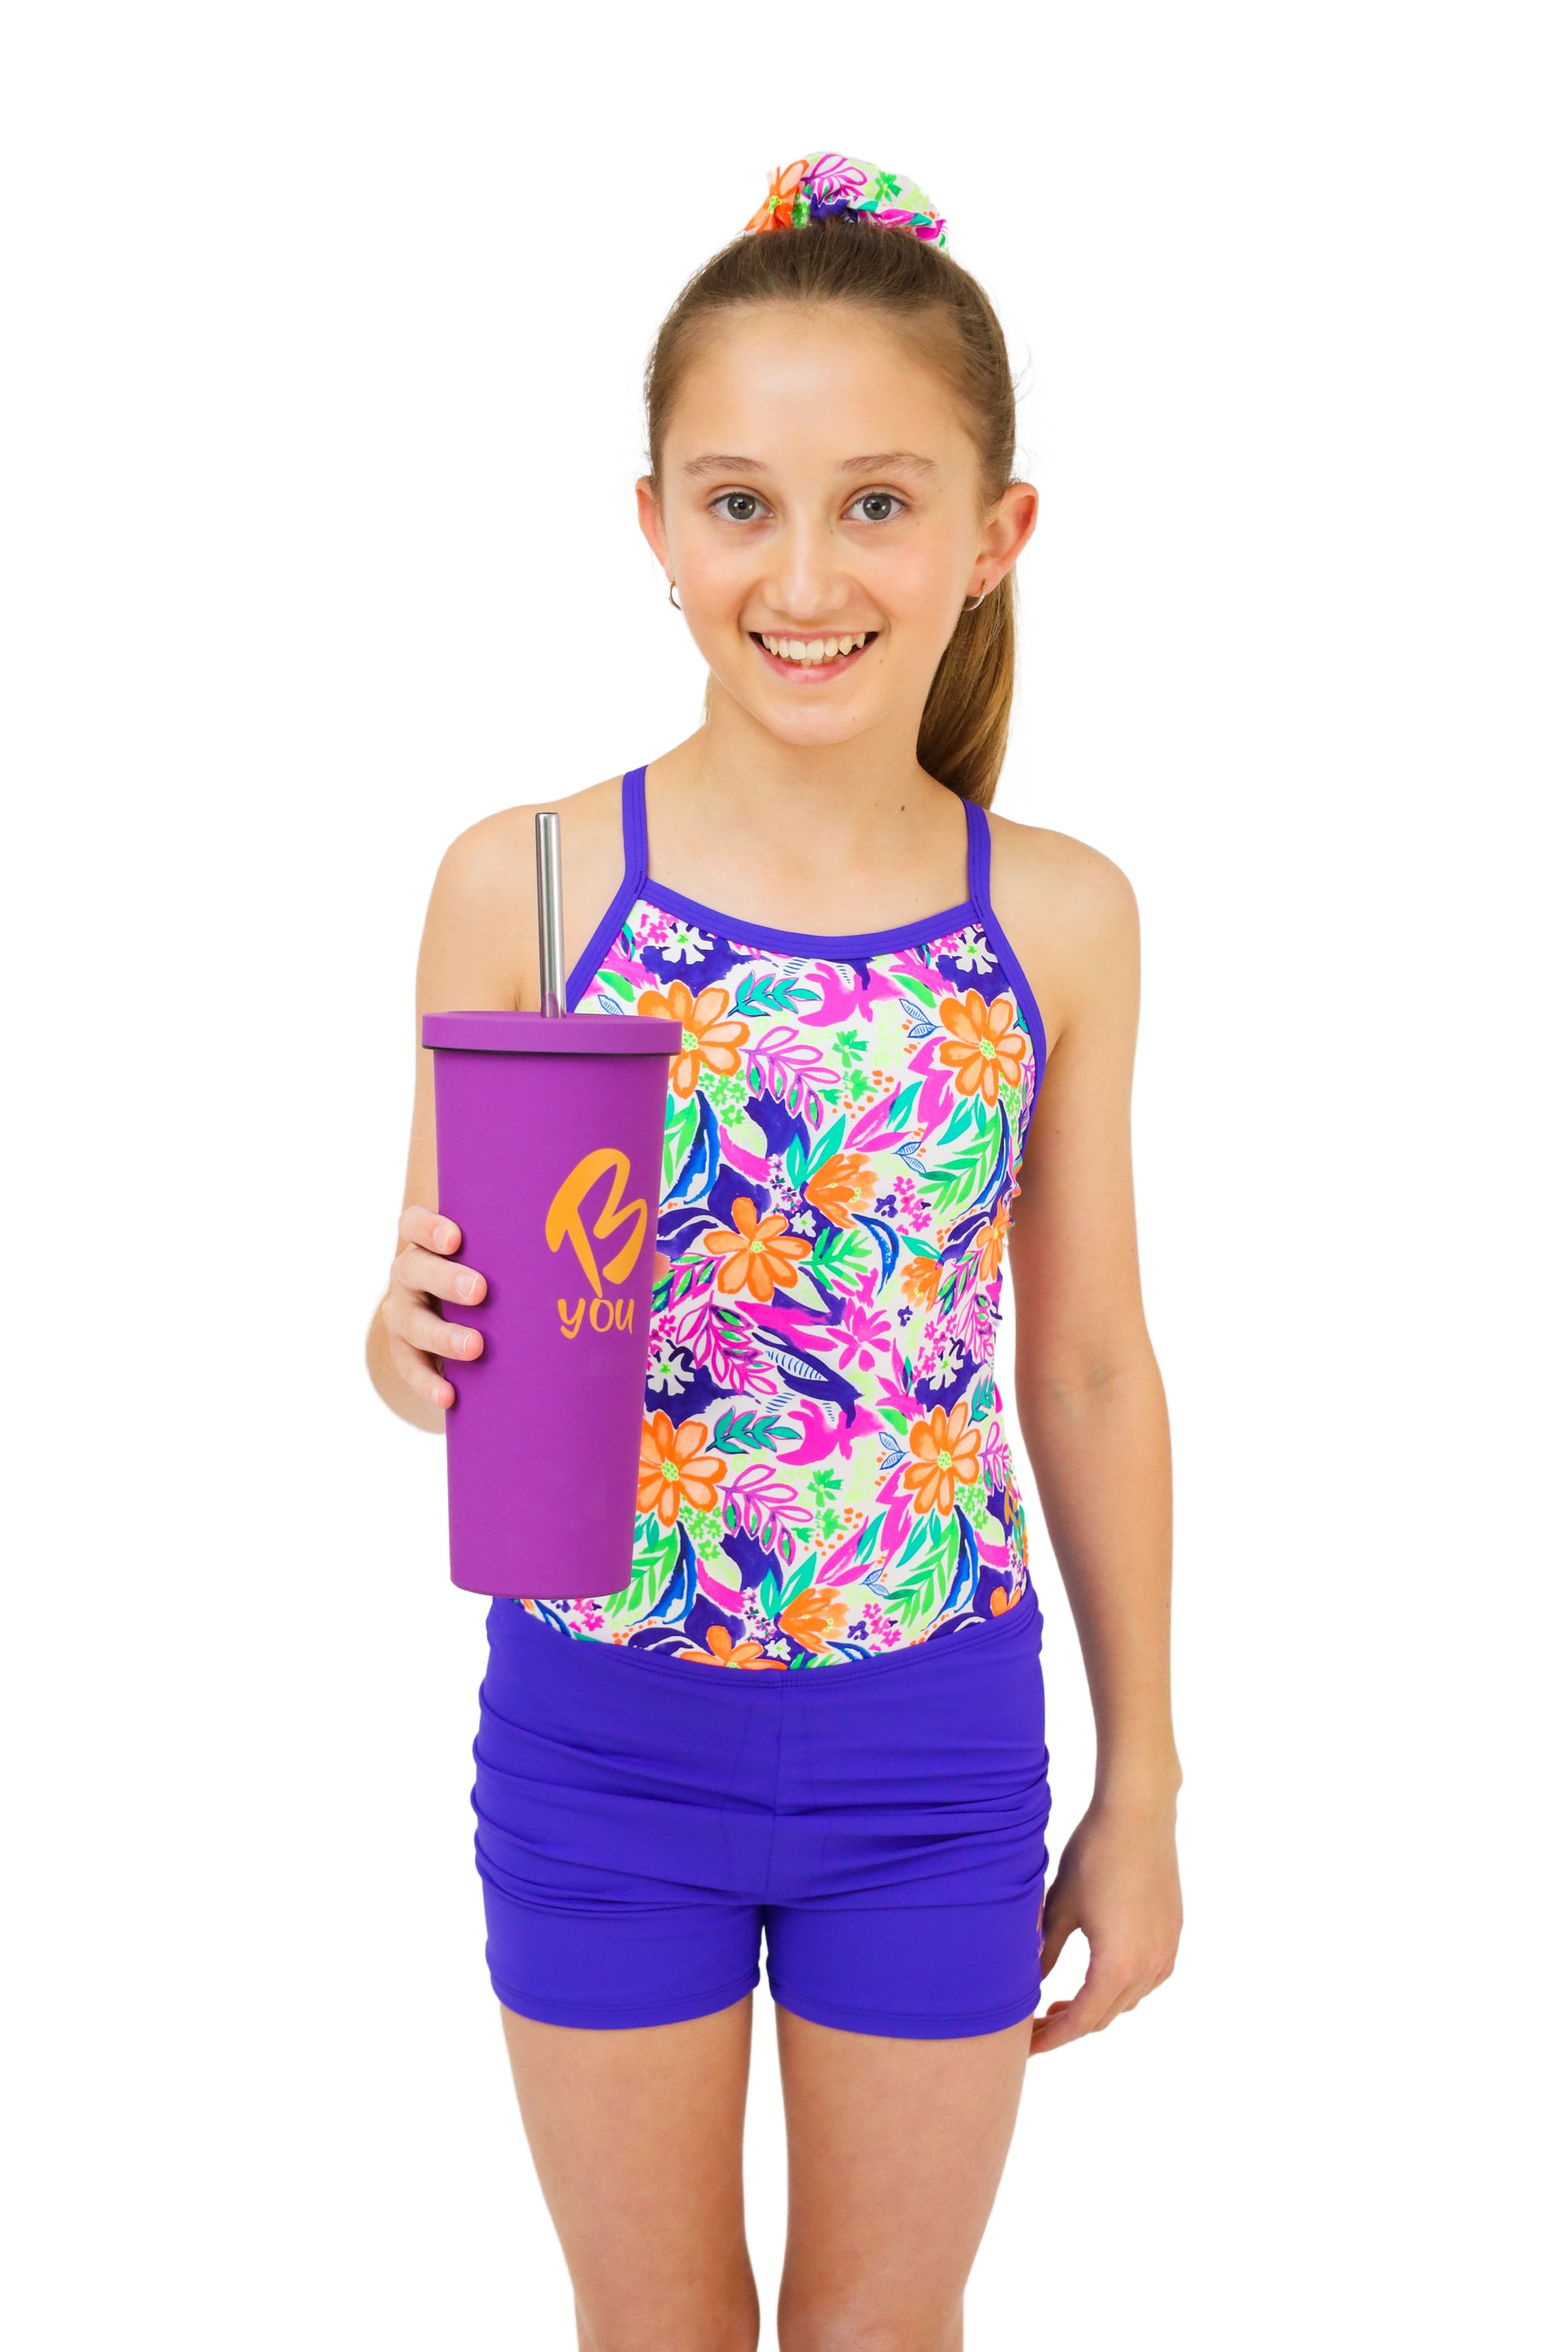 Purple Drink Bottle. Double Walled, Stainless Steel Drink Bottle with Stainless Steel Straw. Keeps Liquid Hot and Cold For 12 Hours. Girls Activewear. B you active, B you leotards, Gymnastics, Swimwear for Girls, Activewear for girls. Sporty Girls Christmas Gift.  